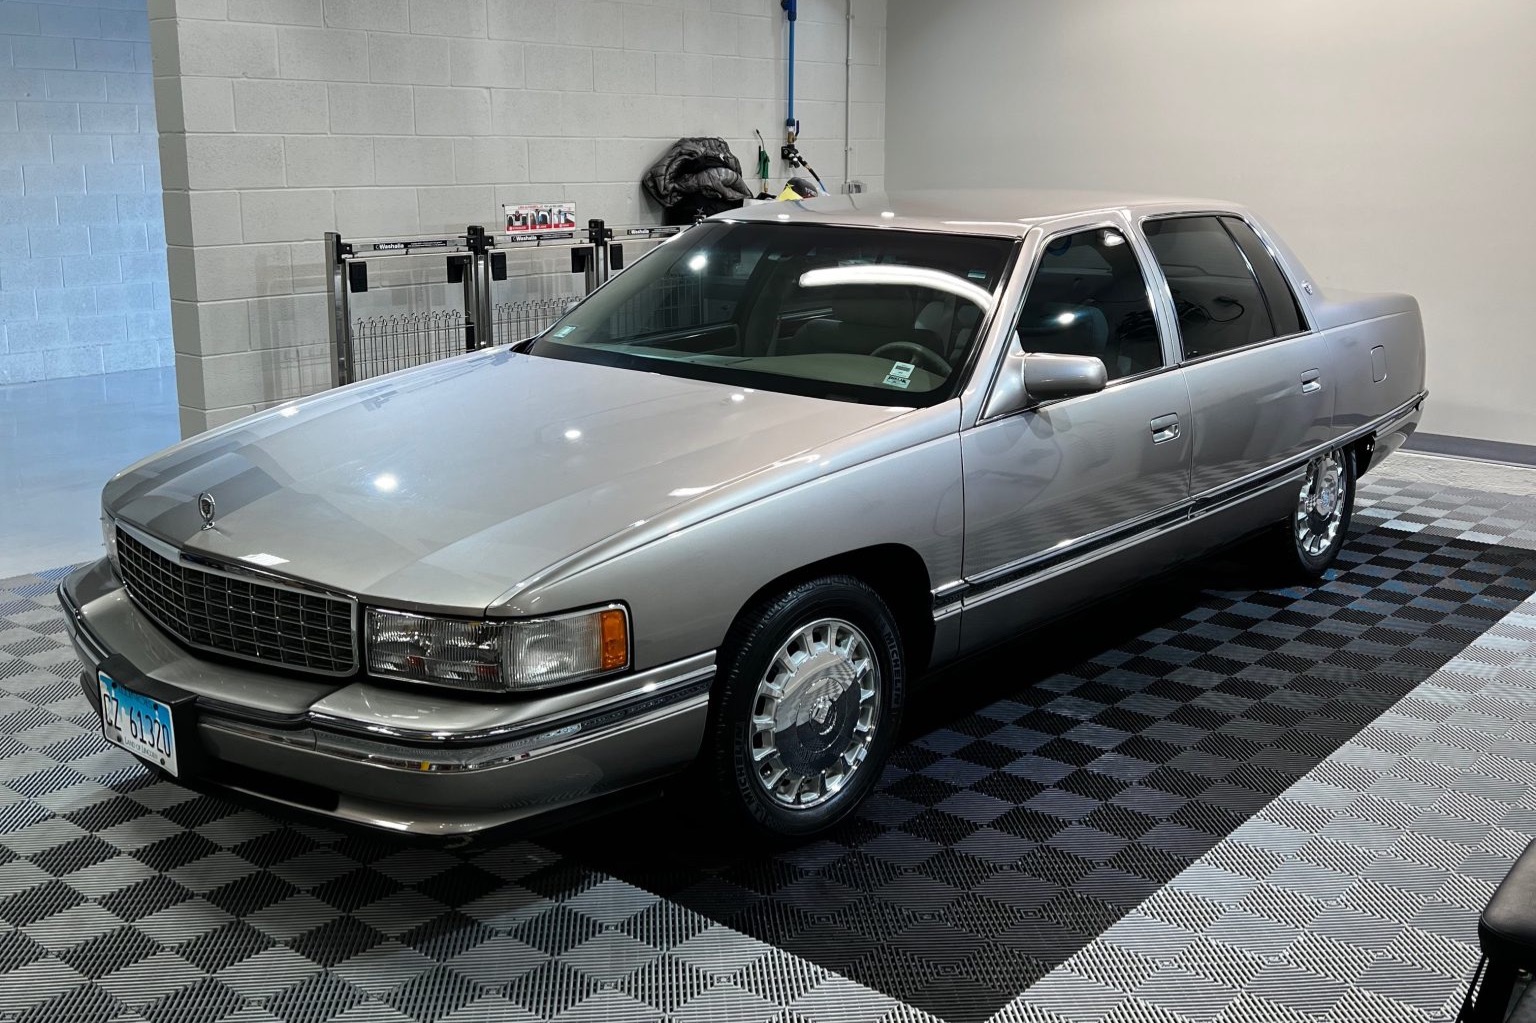 Troubleshooting a 1996 Cadillac DeVille: Start-up Success but No Movement